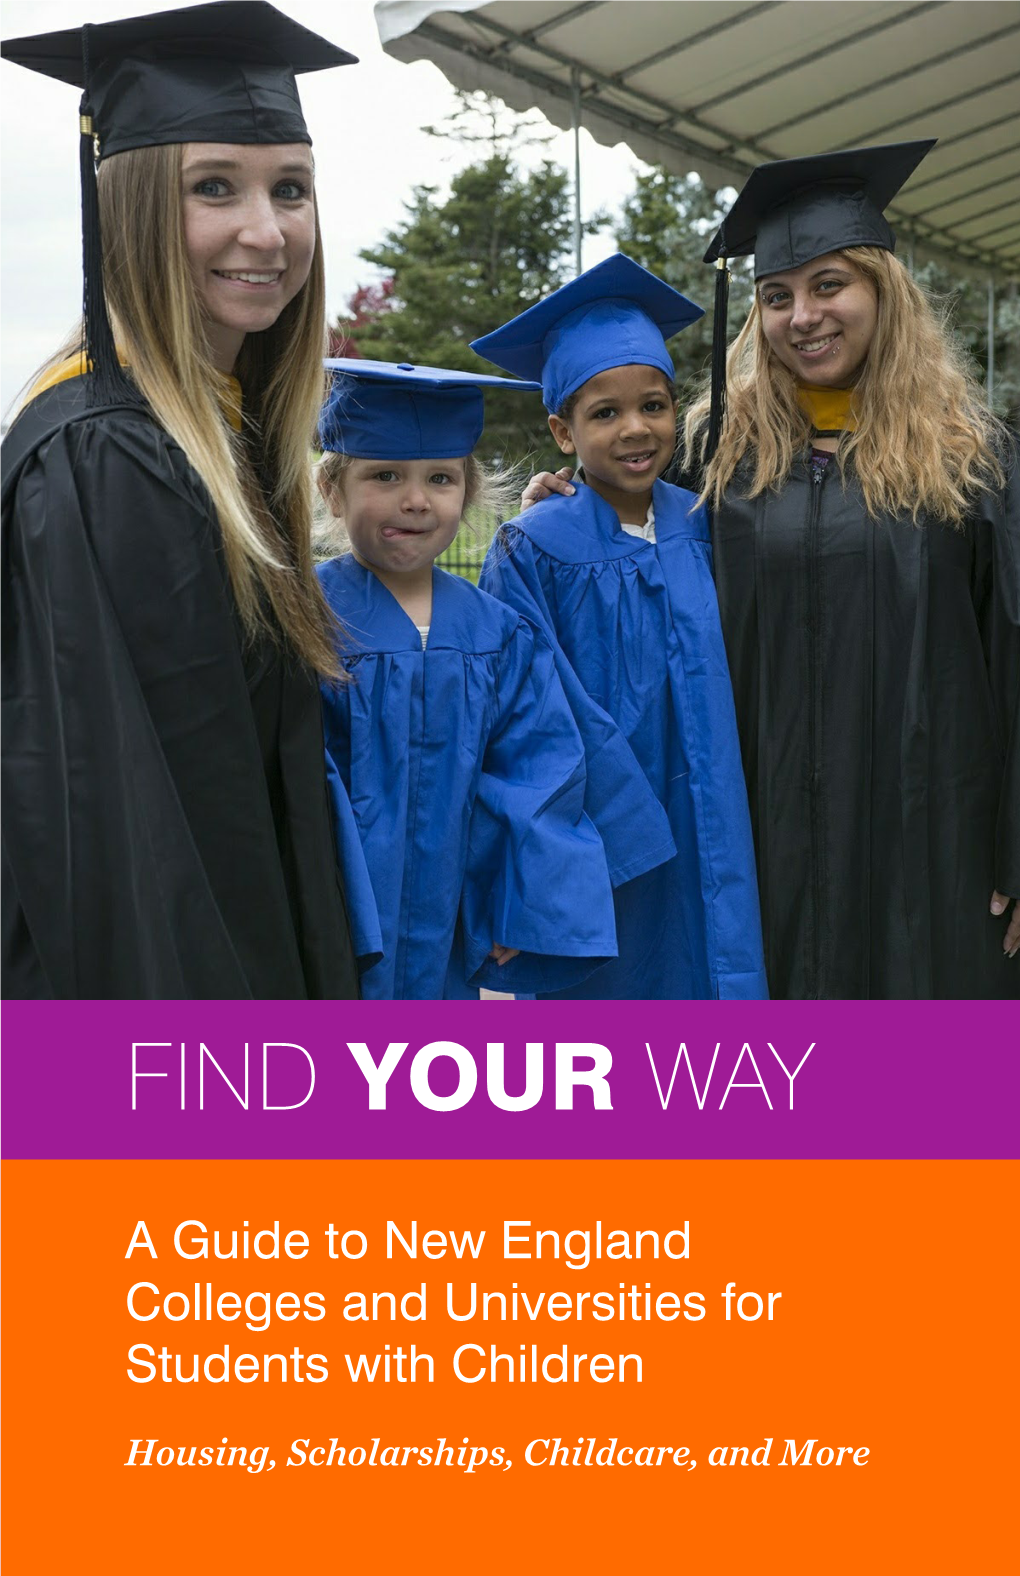 Find Your Way: a Guide to New England Colleges and Universities for Students with Children